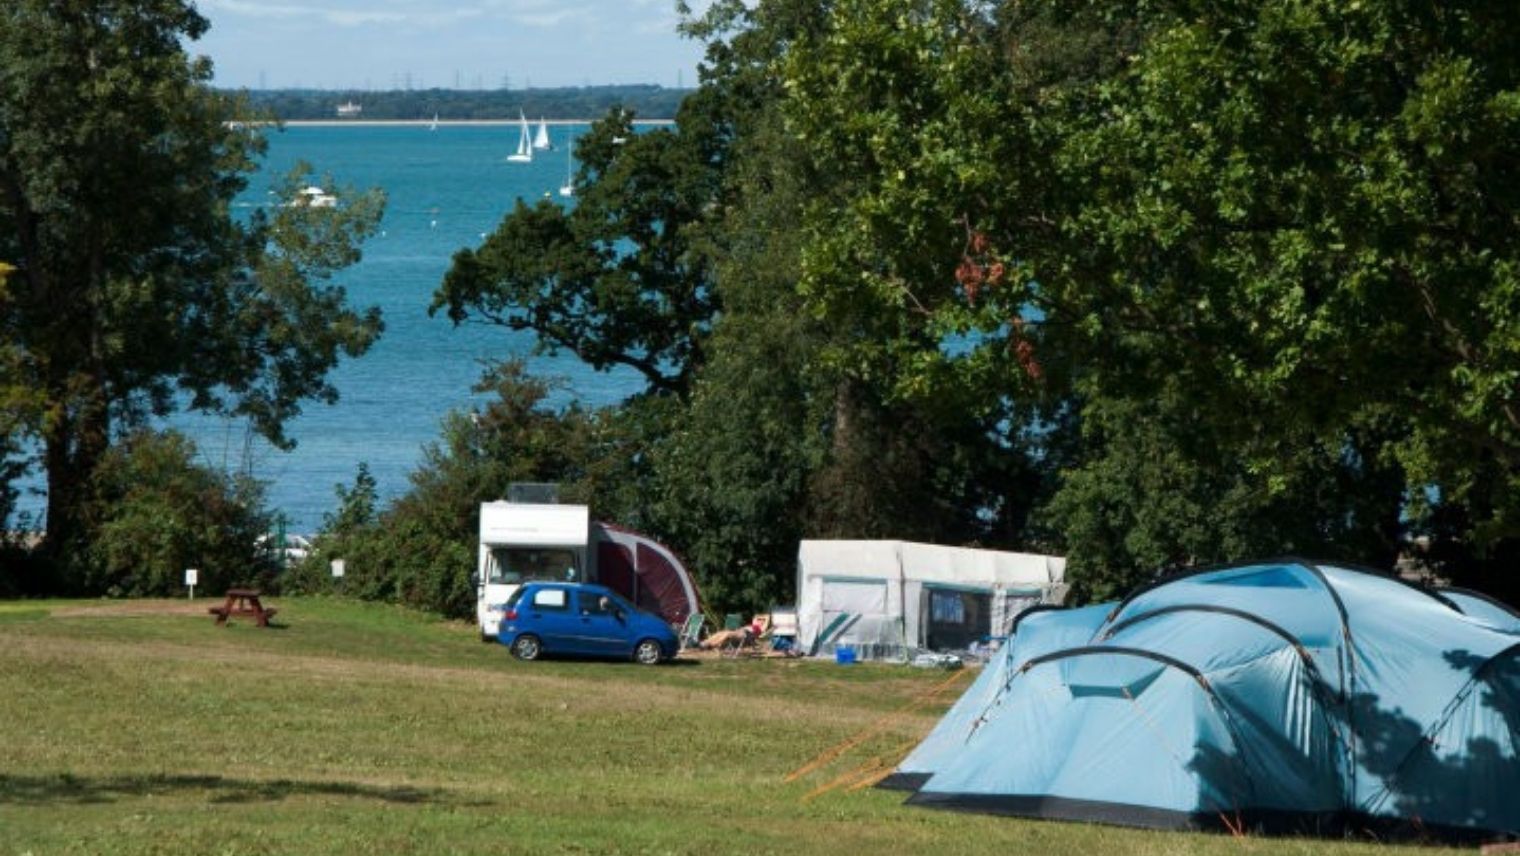 A view over the water from Waverley Park campsite